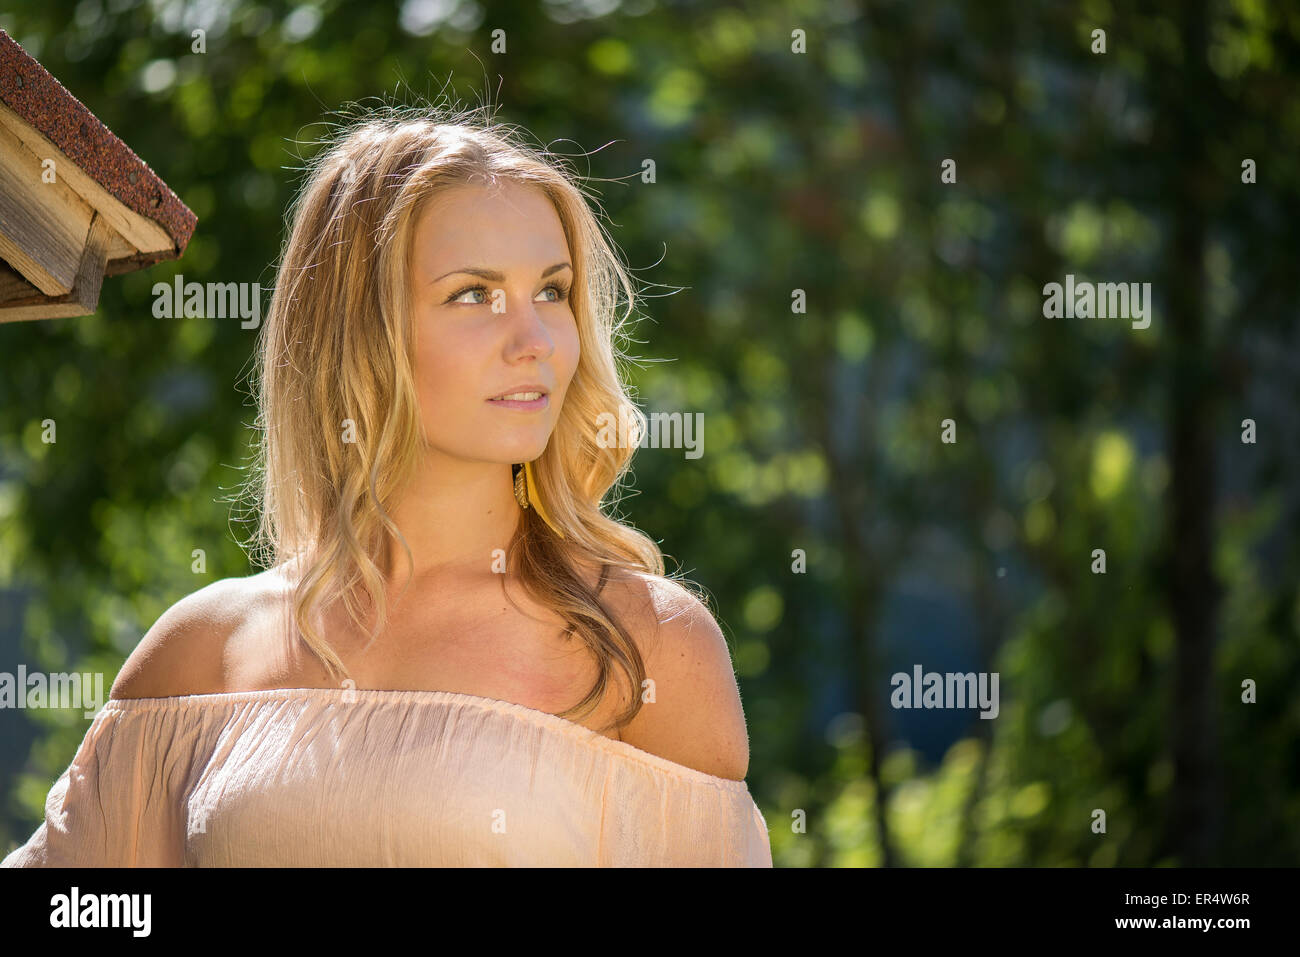 Blond countryside woman looking far Stock Photo